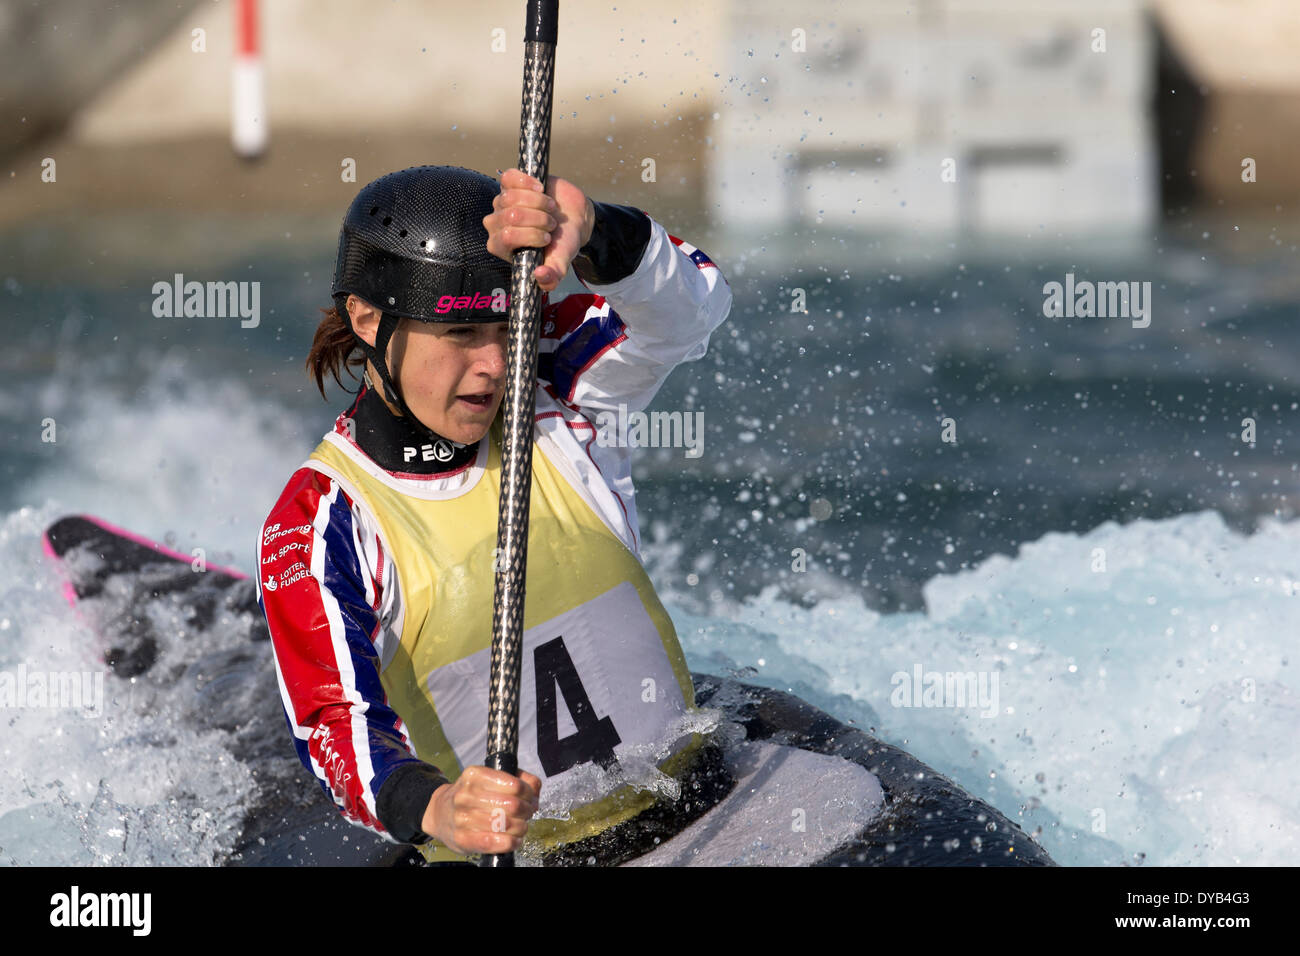 Beth LATHAM, A Final K1 Women's GB Canoe Slalom 2014 Selection Trials Lee Valley White Water Centre, London, UK Stock Photo